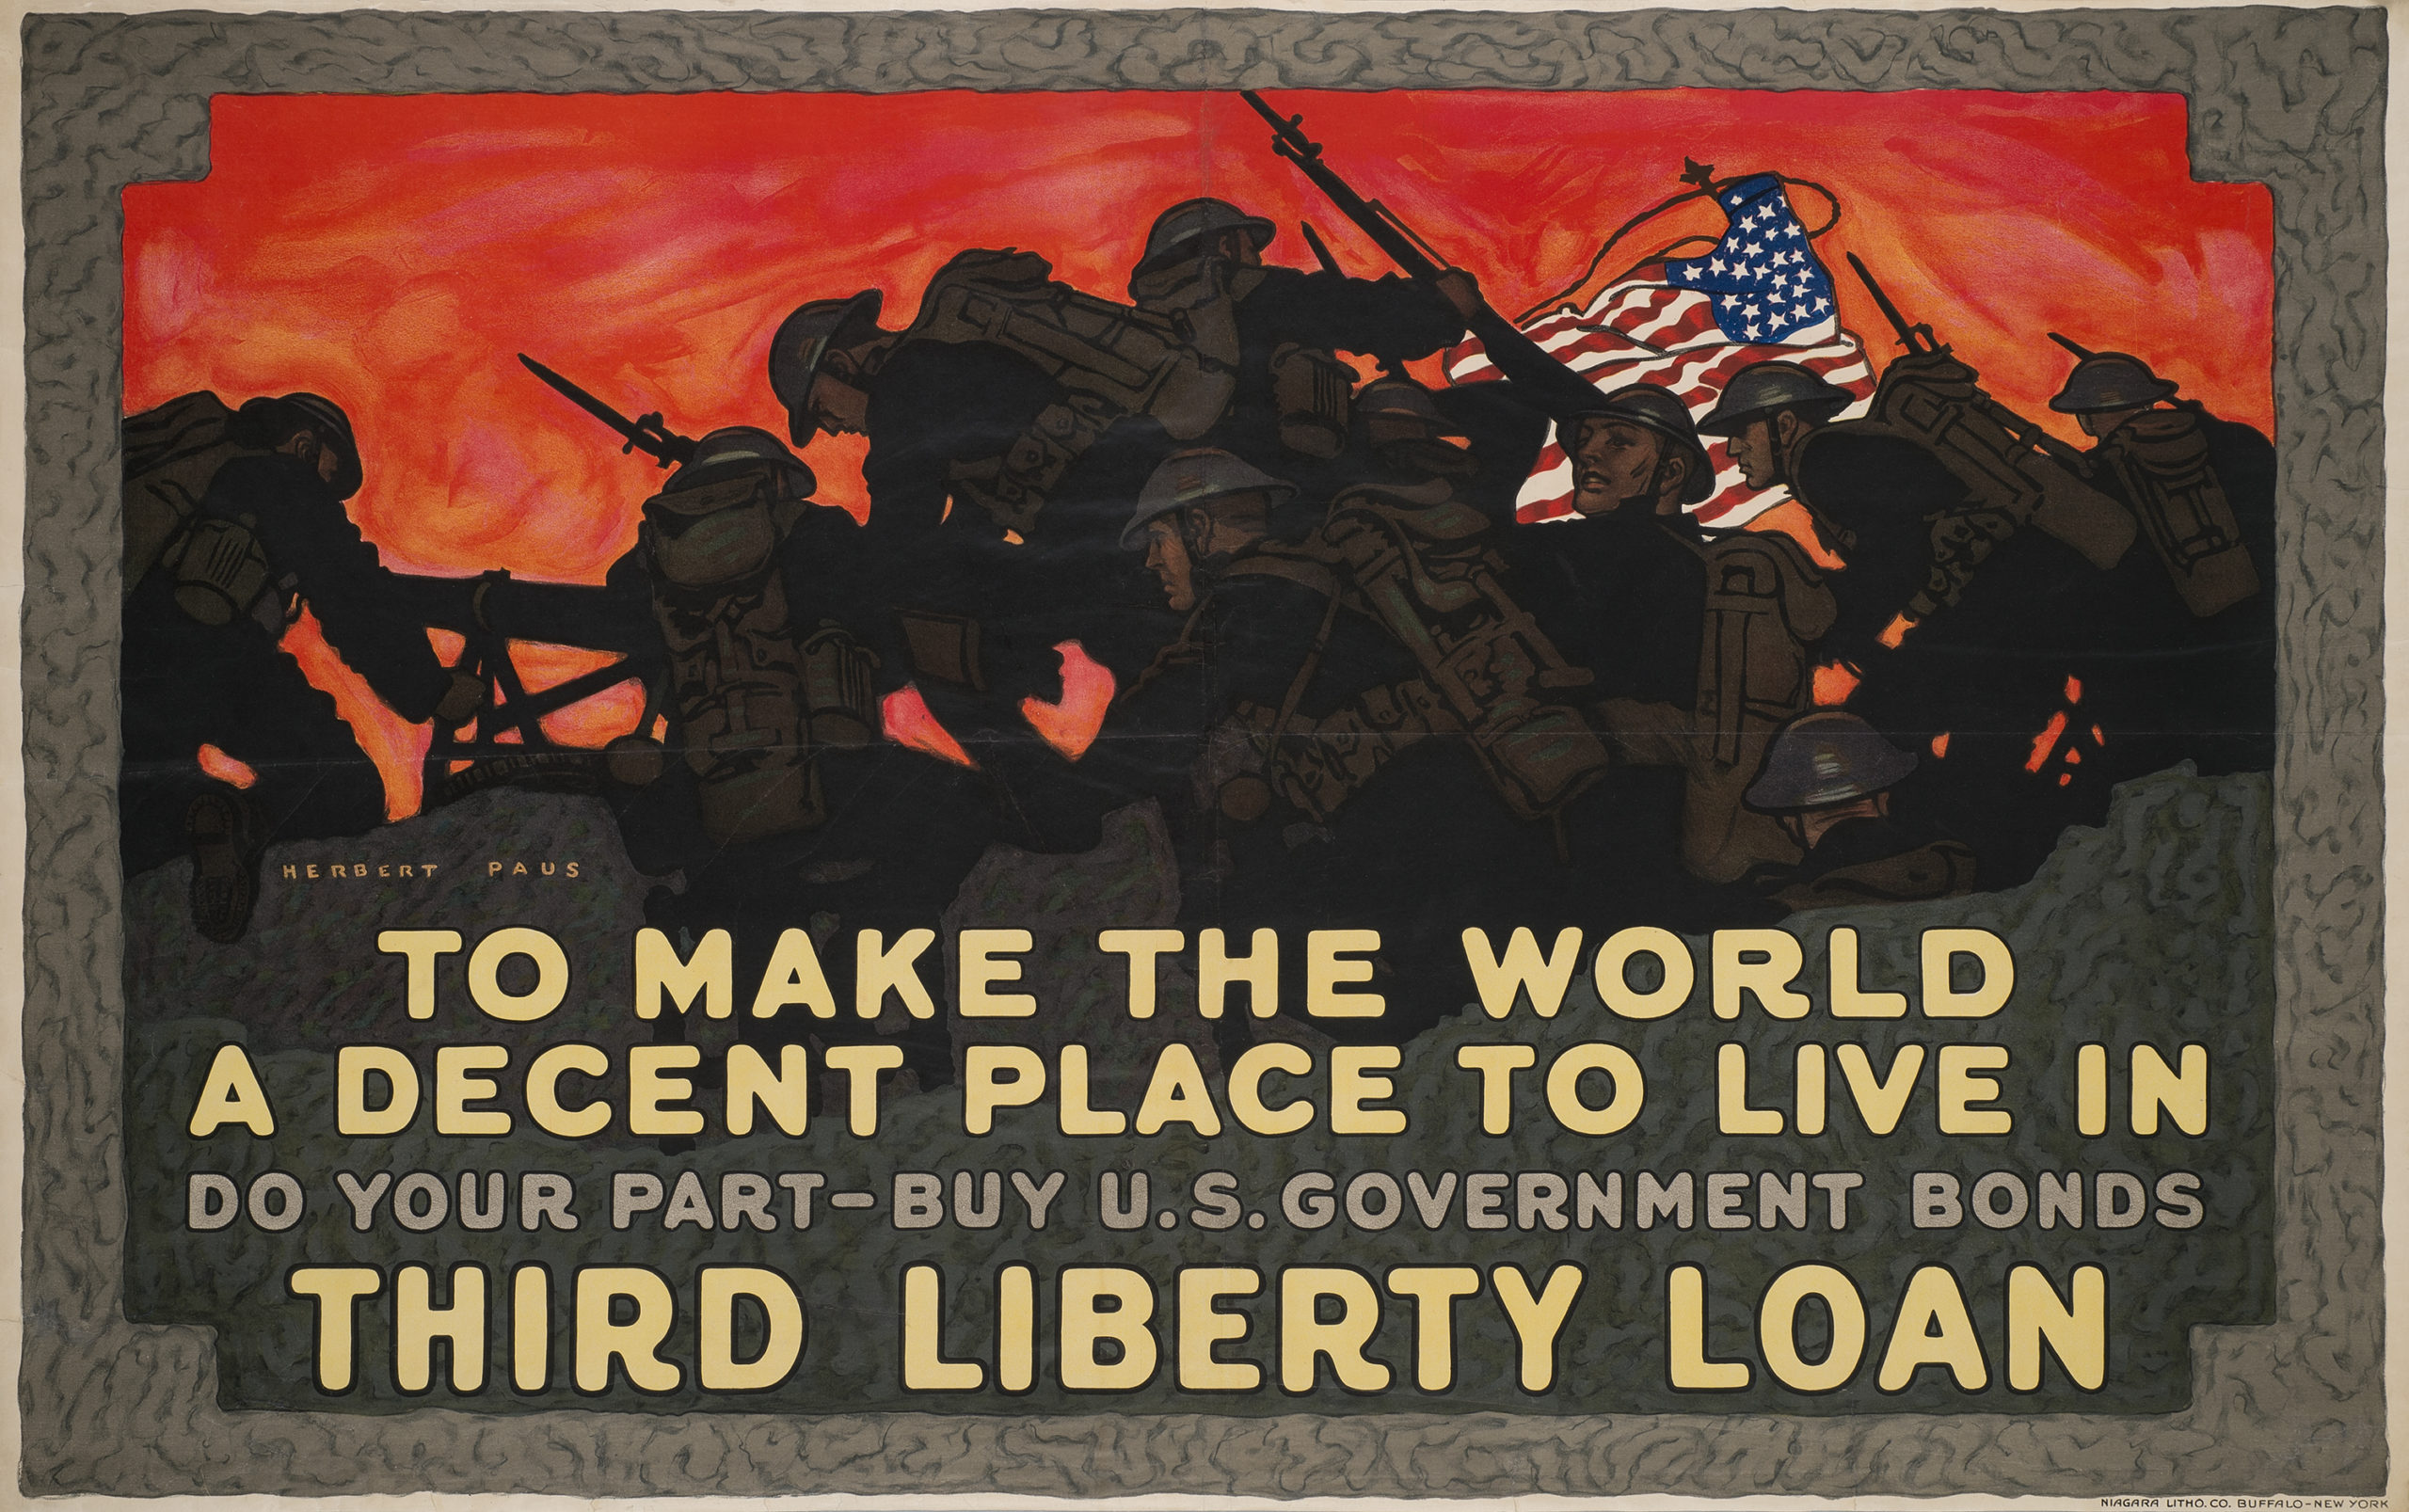 These WWI Propaganda Posters Are Gorgeous… And Seriously Messed Up